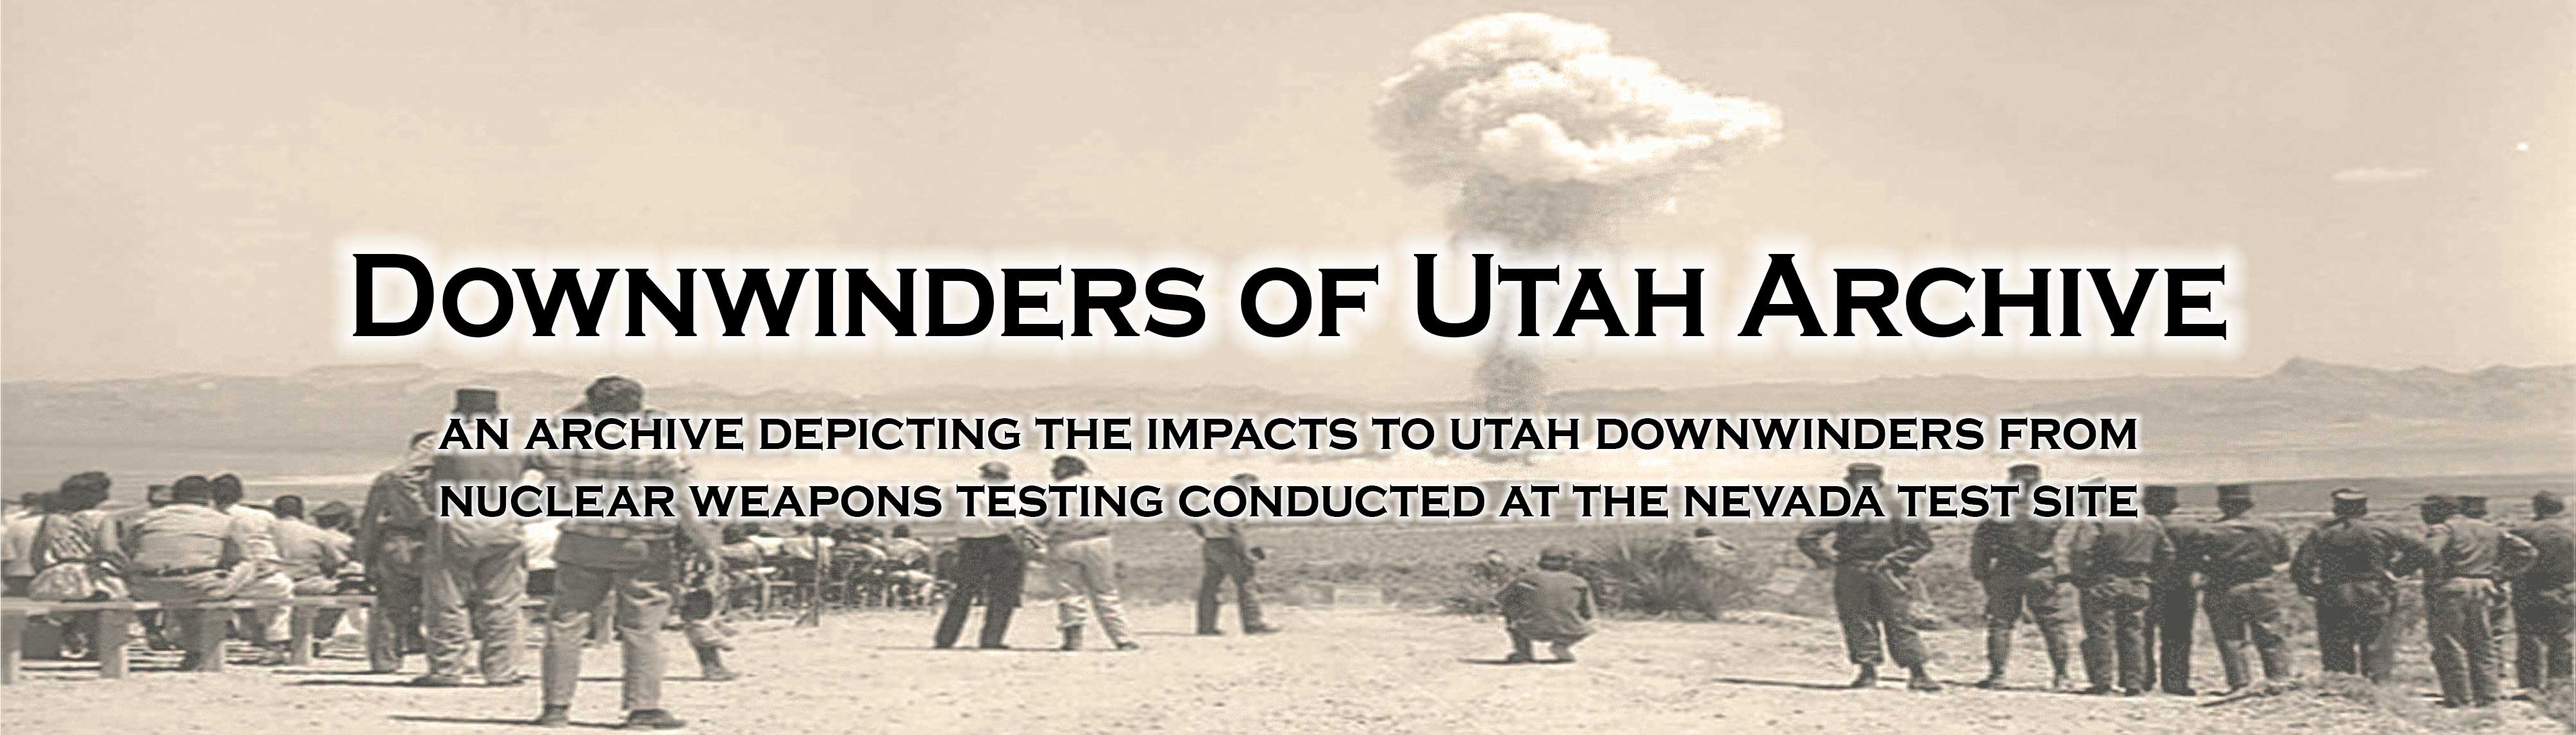 Downwinders of Utah Archive: An archive depicting the impacts to Utah downwinders from nuclear weapons testing conducted at the Nevada Test Site.